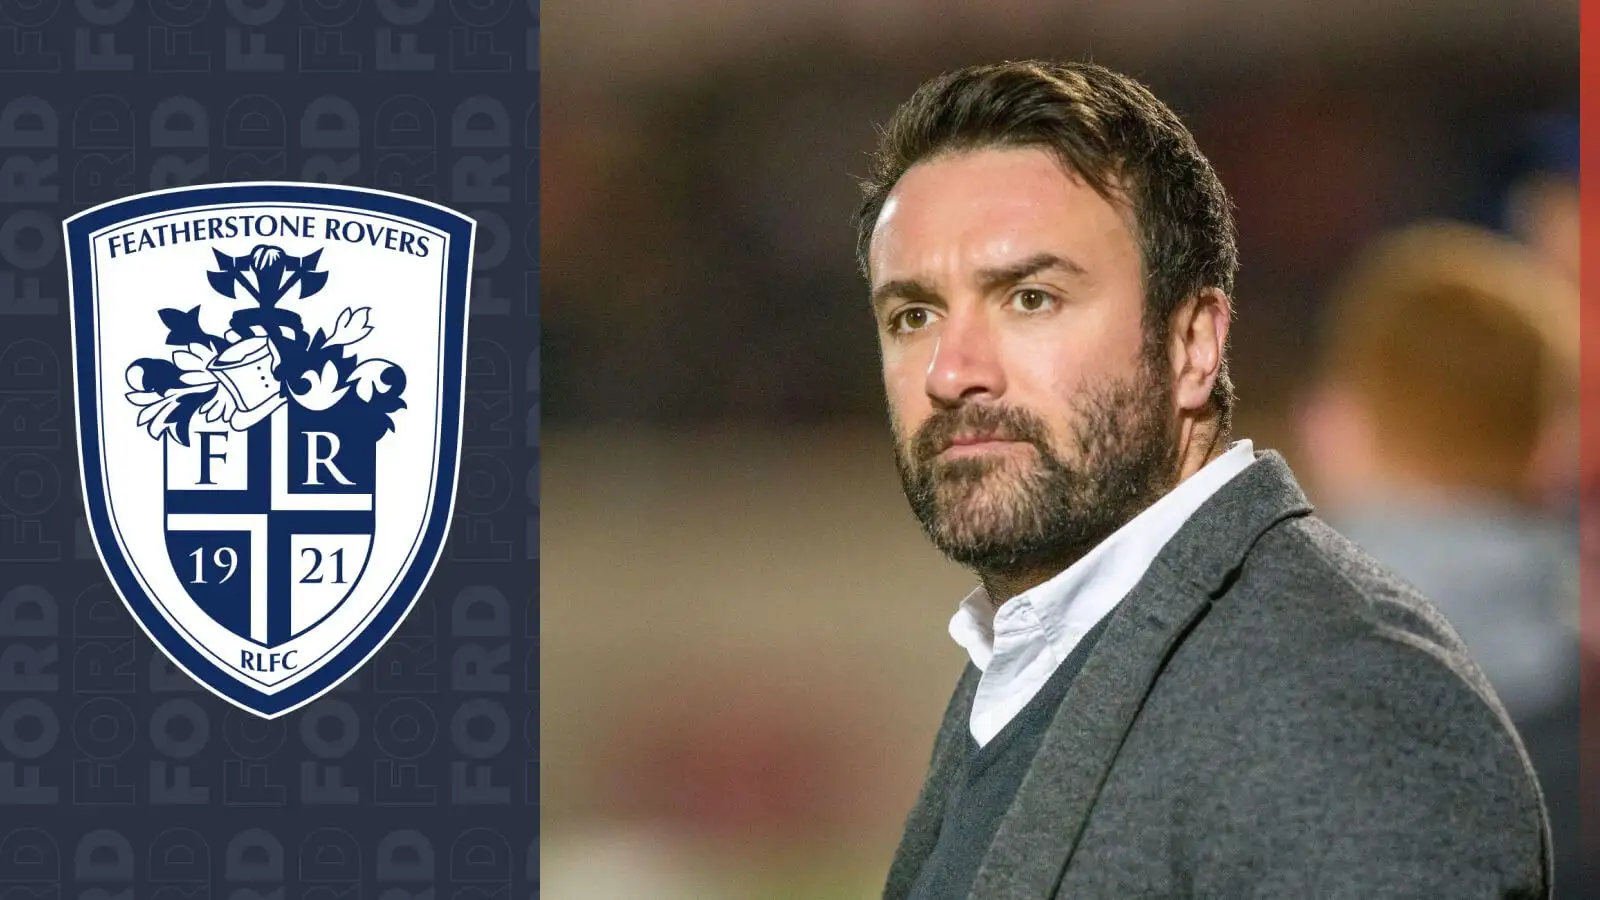 Featherstone Rovers’ Super League objective remains unchanged, more new signings planned: ‘We are not finished here’